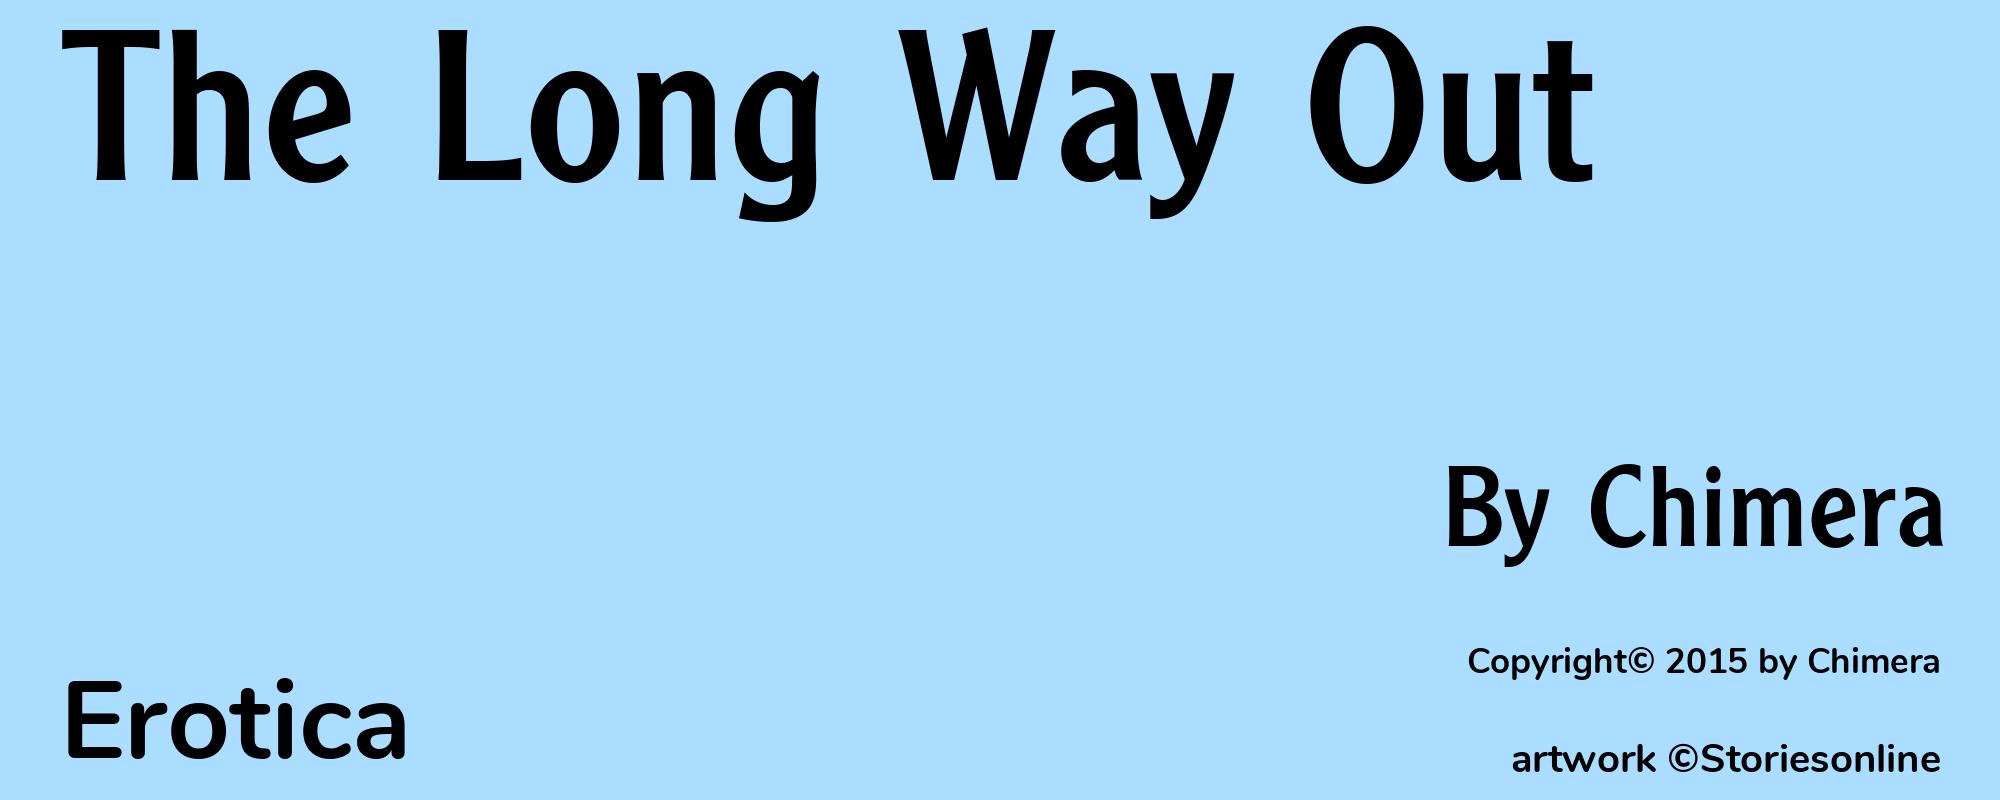 The Long Way Out - Cover